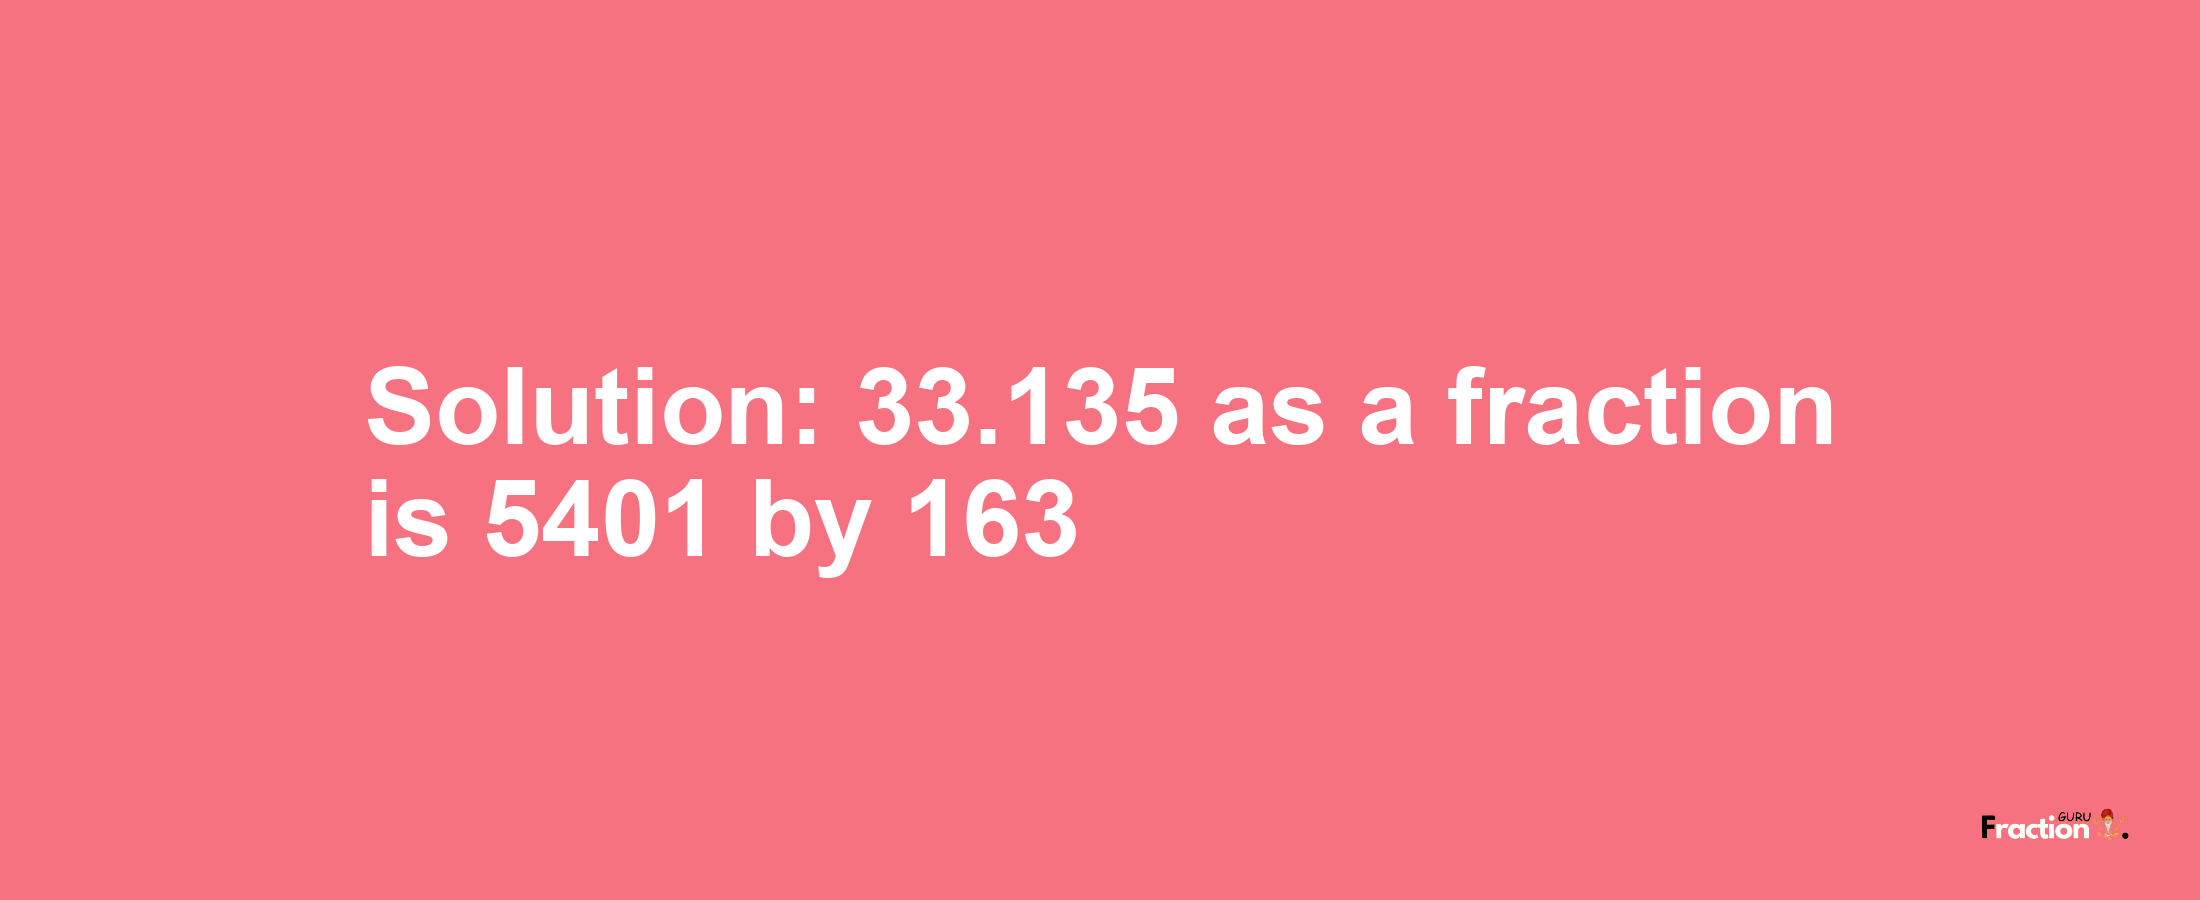 Solution:33.135 as a fraction is 5401/163